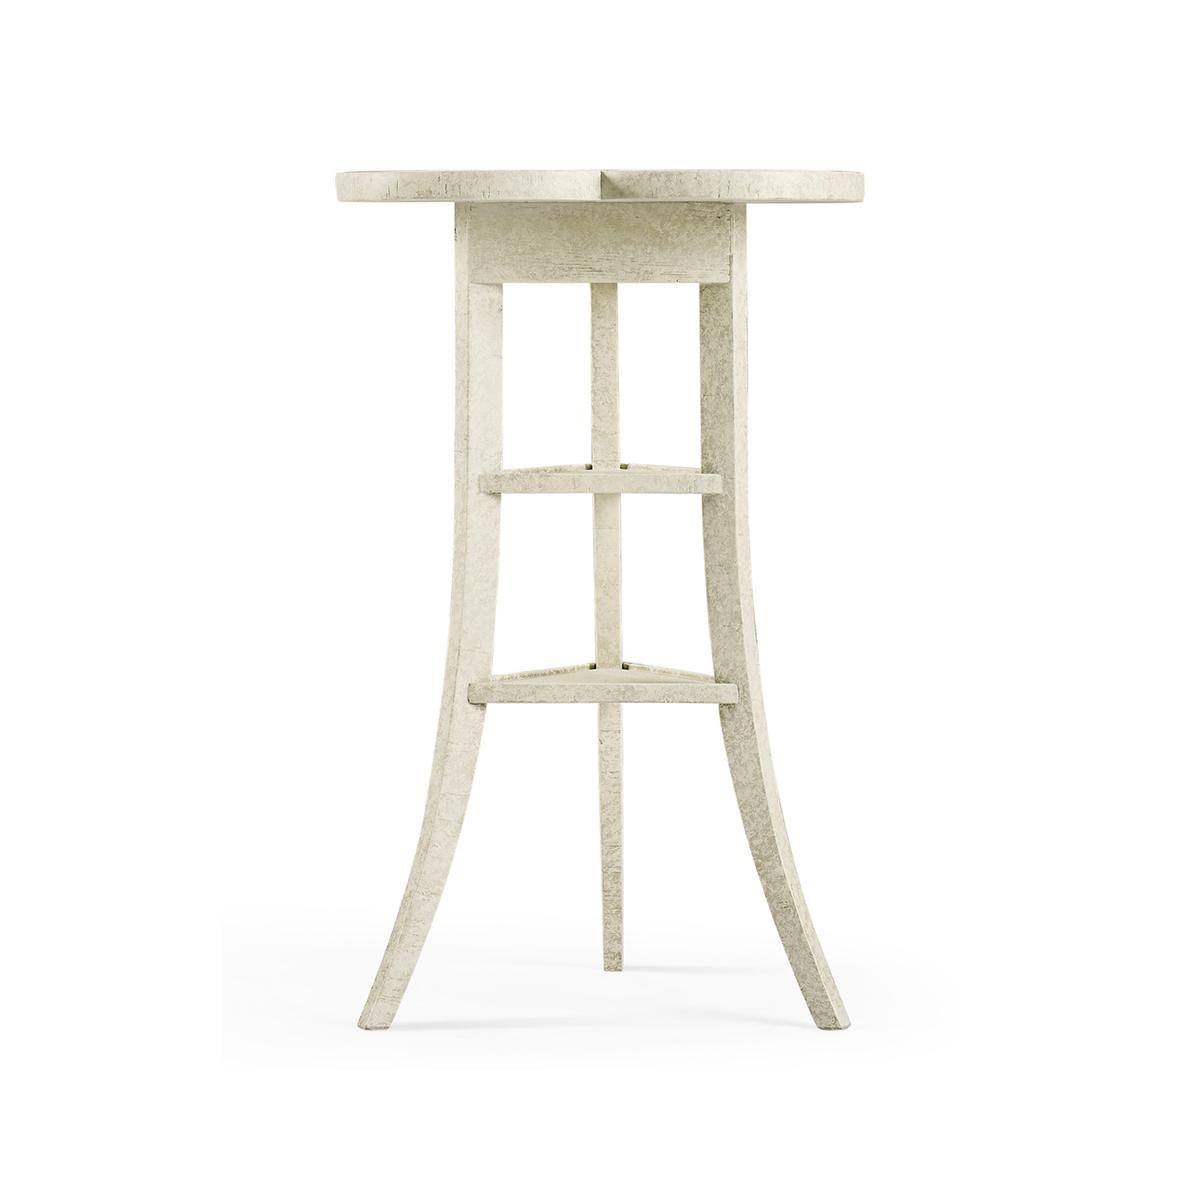 Trefoil Three-Tier side table, a heavily distressed side table with a trefoil top mounted on three splayed legs around two triangular shelves in a whitewash finish.

Dimensions: 16